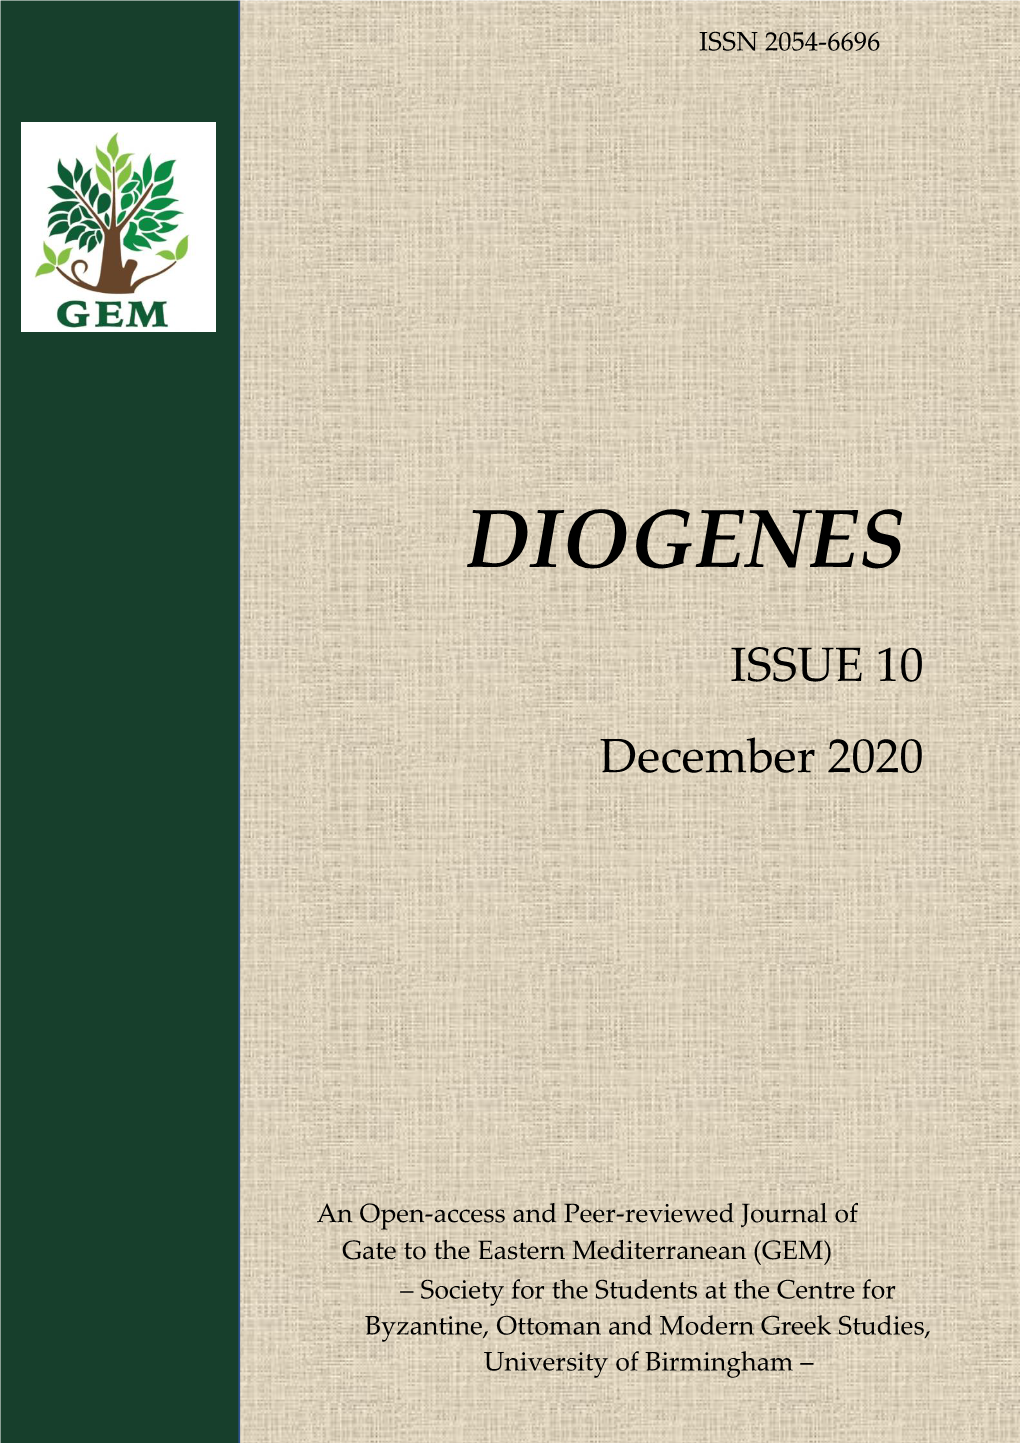 Diogenes 10 (2020) ISSN 2054-6696